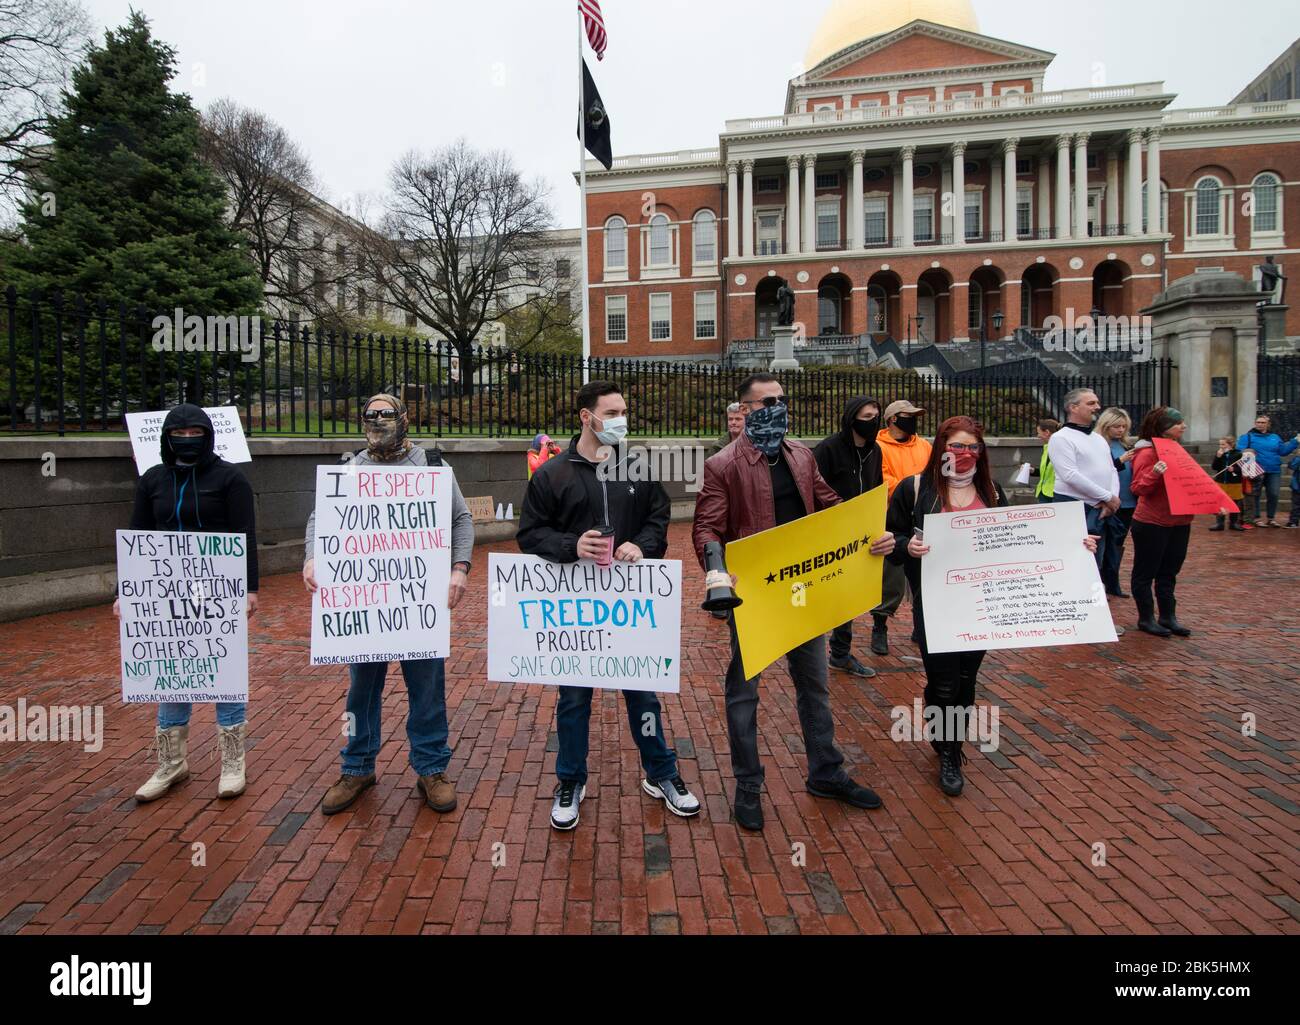 Boston, MA, USA, 01 May 2020.  Less than 50 pro U.S. President Trump demonstrators took part in a rally to reopen Massachusetts in front of the Massachusetts State House in central Boston on the same day that Massachusetts governor Charlie Baker made wearing a face covering or mask mandatory in public.  Baker also extended his states stay-at-home order until May 18th. Stock Photo